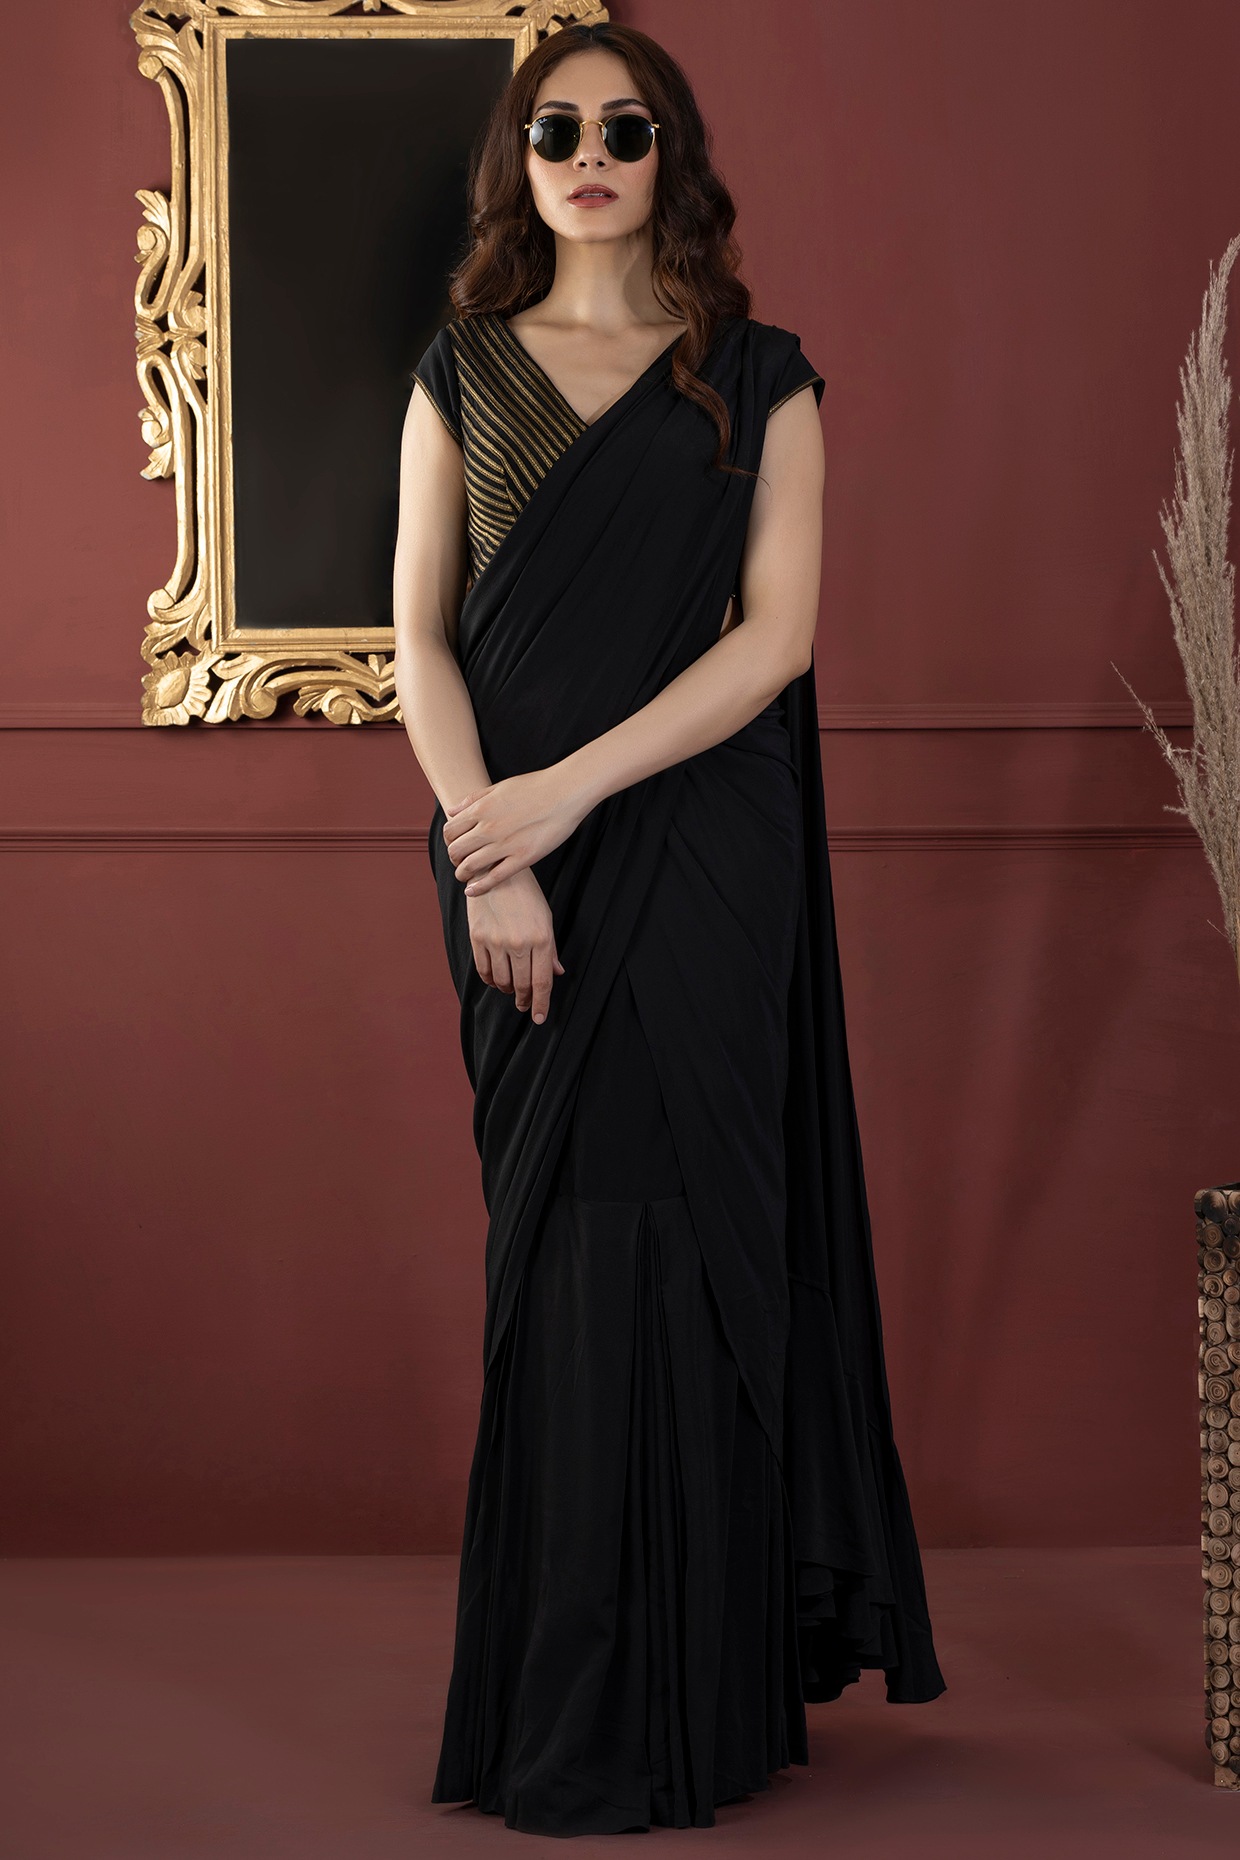 Black 3D flowers embroidered Ruffle Saree available only at IBFW